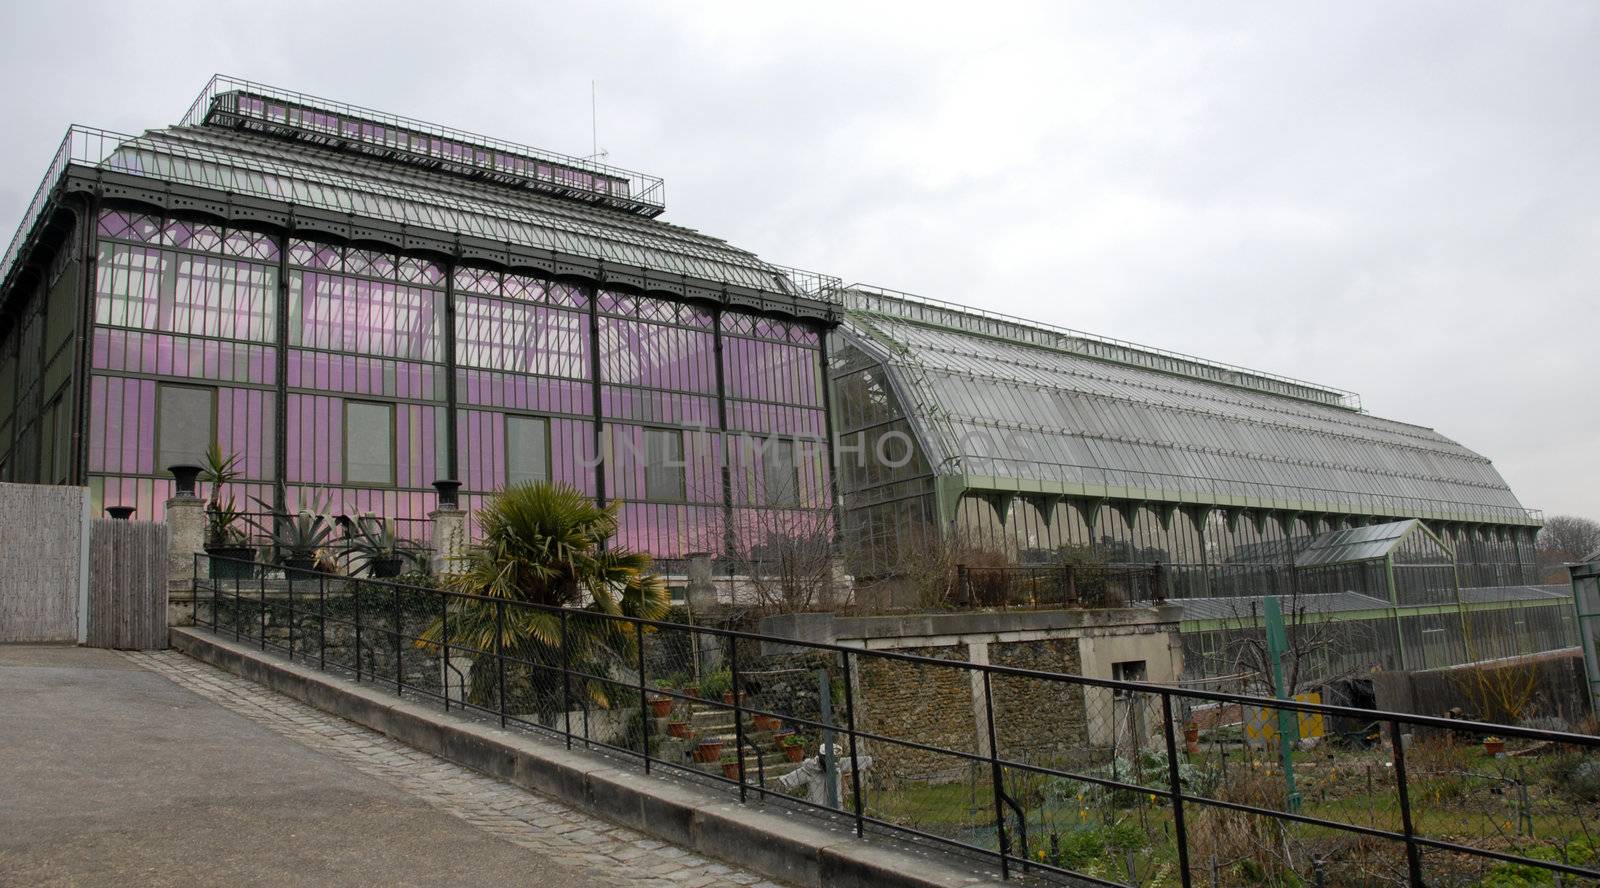 greenhouses of museum in Paris by cynoclub